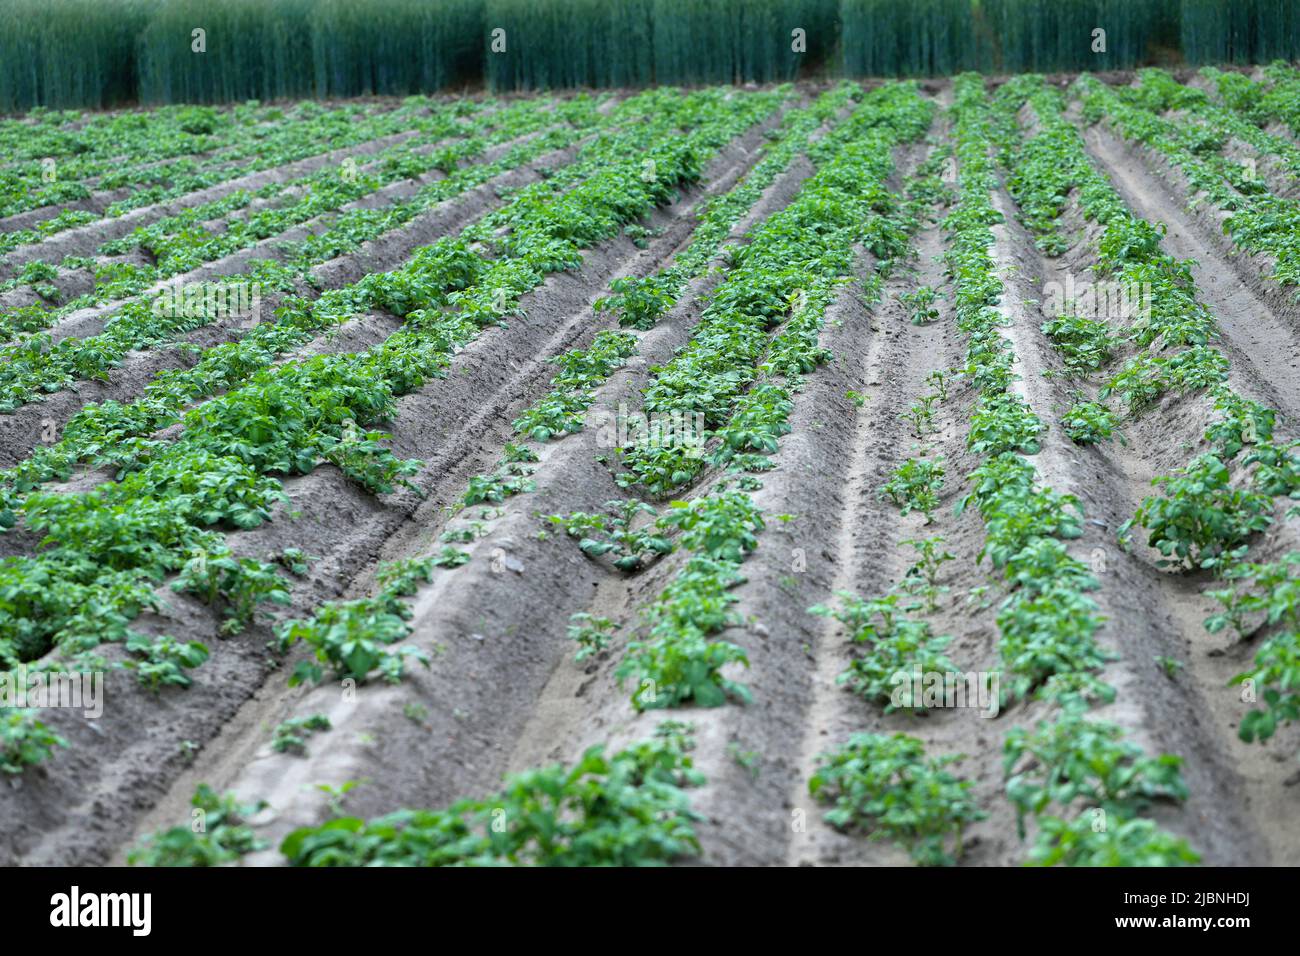 Potato crop in monoculture and numerous potato weeds from the previous year. Herblological problem. Stock Photo